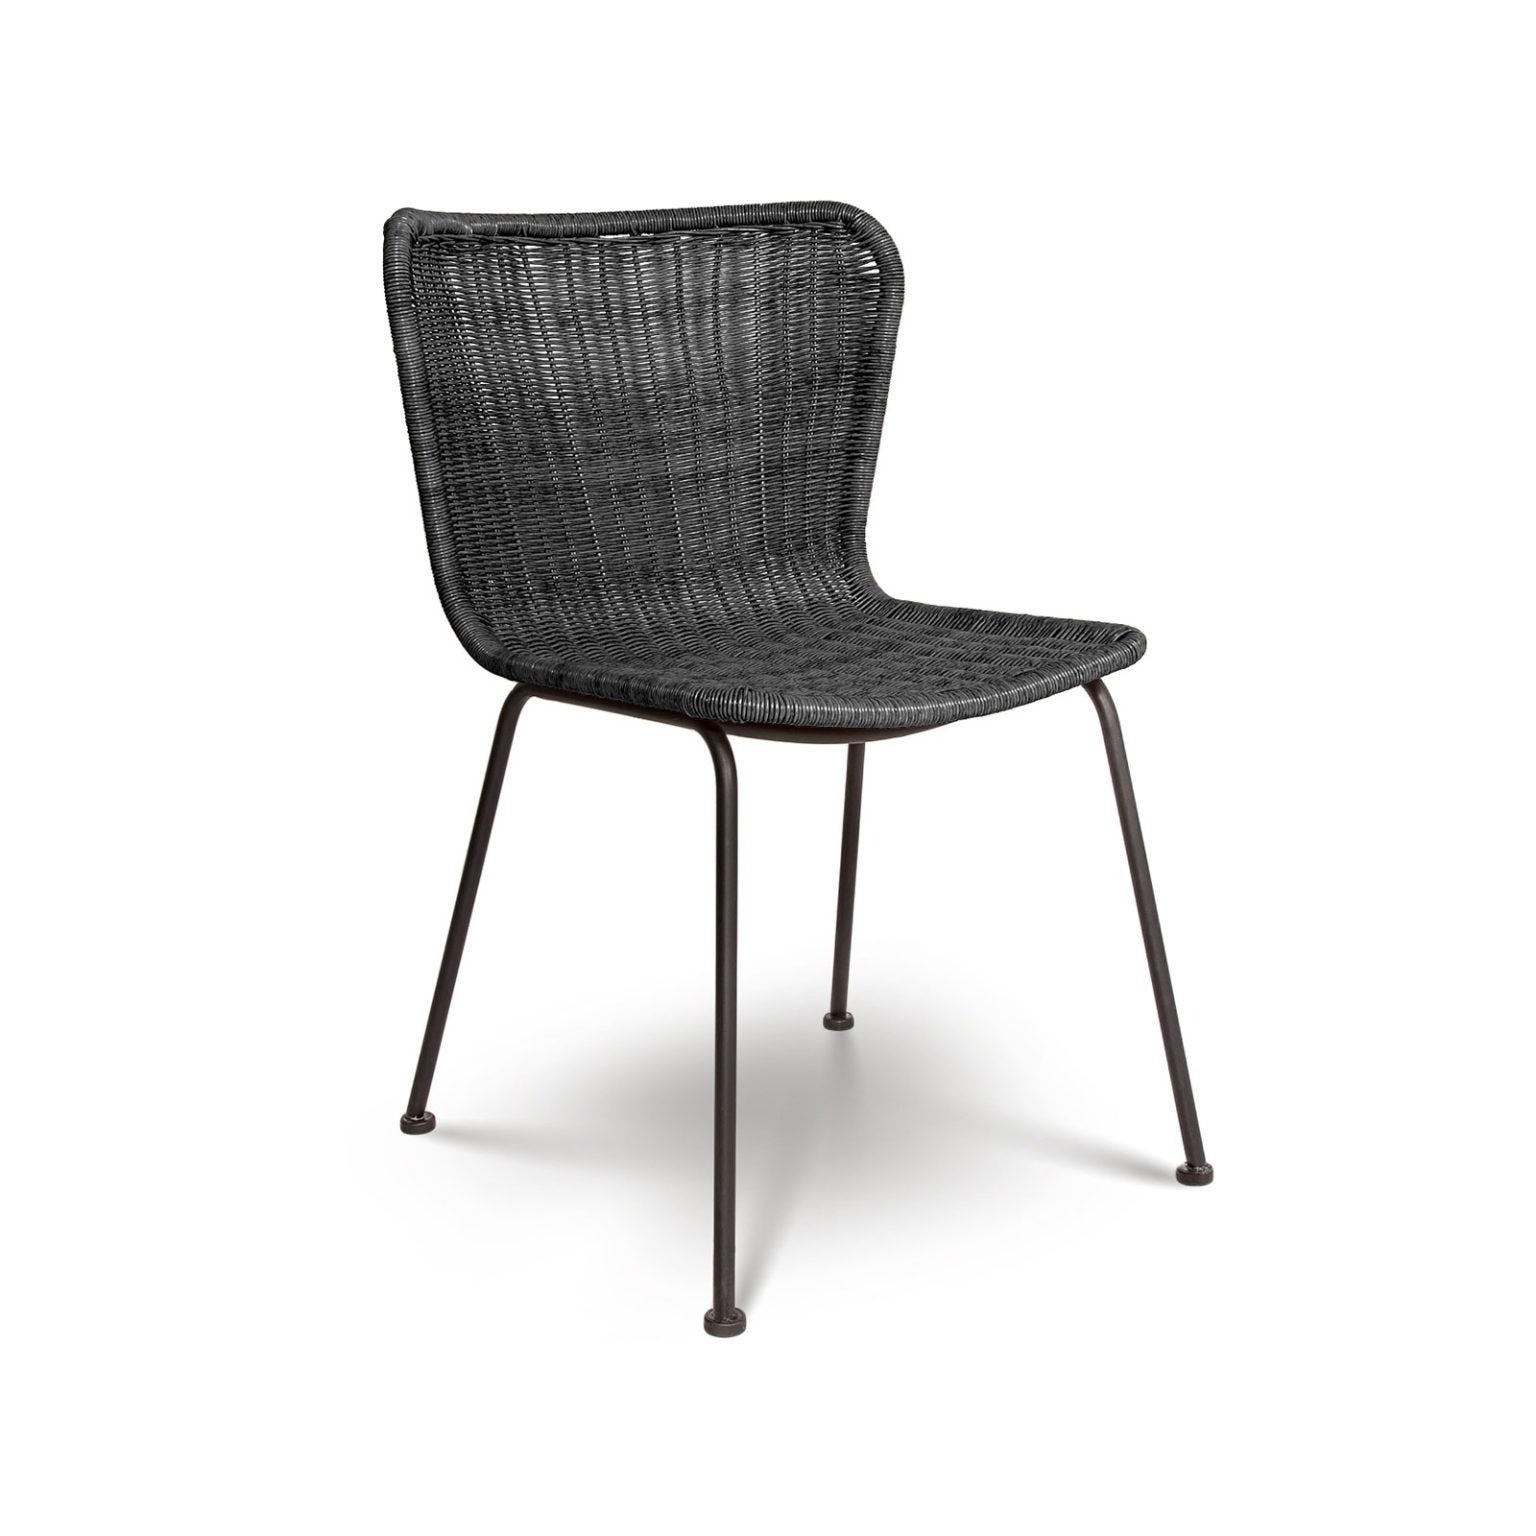 Callie Woven Dining Chair - Black - Rug & Weave